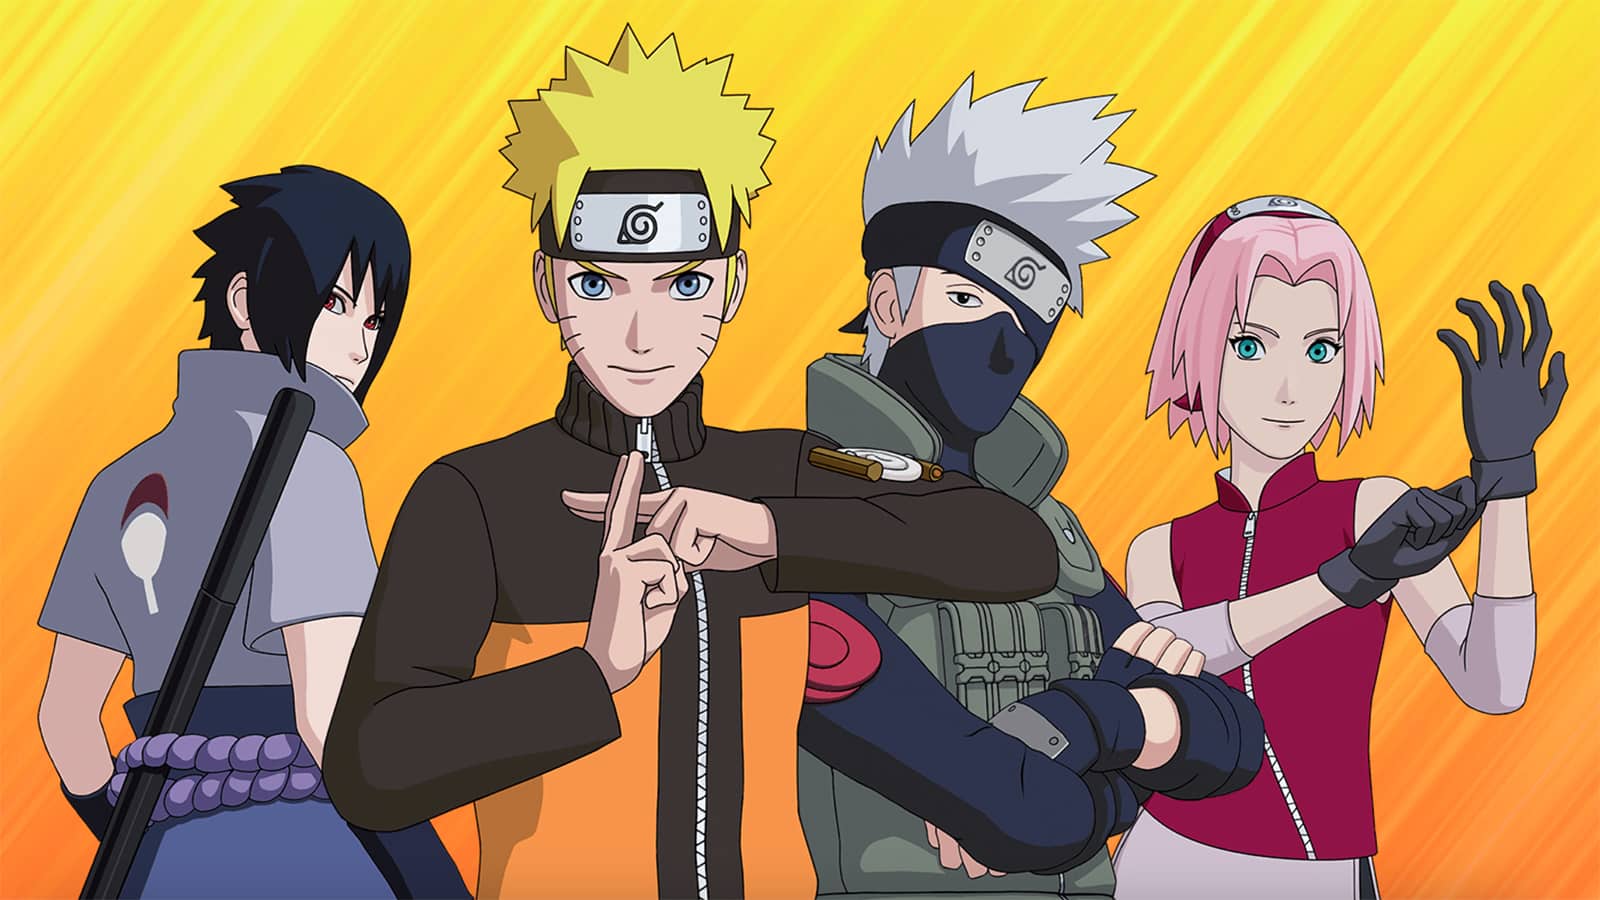 Naruto and friends appearing in fortnite for the nindo challenges